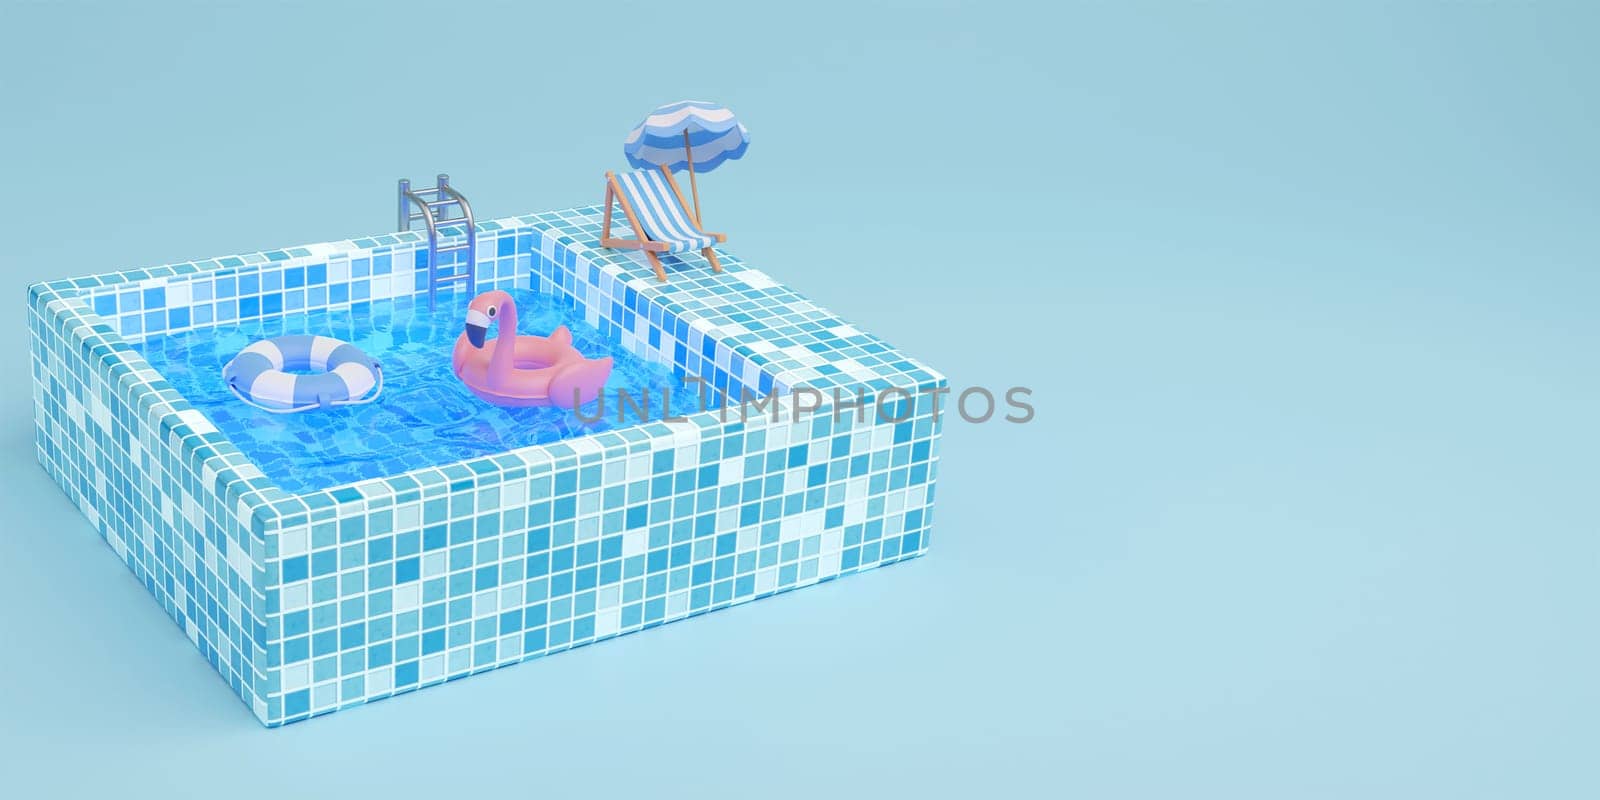 Swimming pool with lounge chairs, umbrella and Pink flamingo. Creative summer concept idea with copy space. illustration banner 3d rendering illustration by meepiangraphic